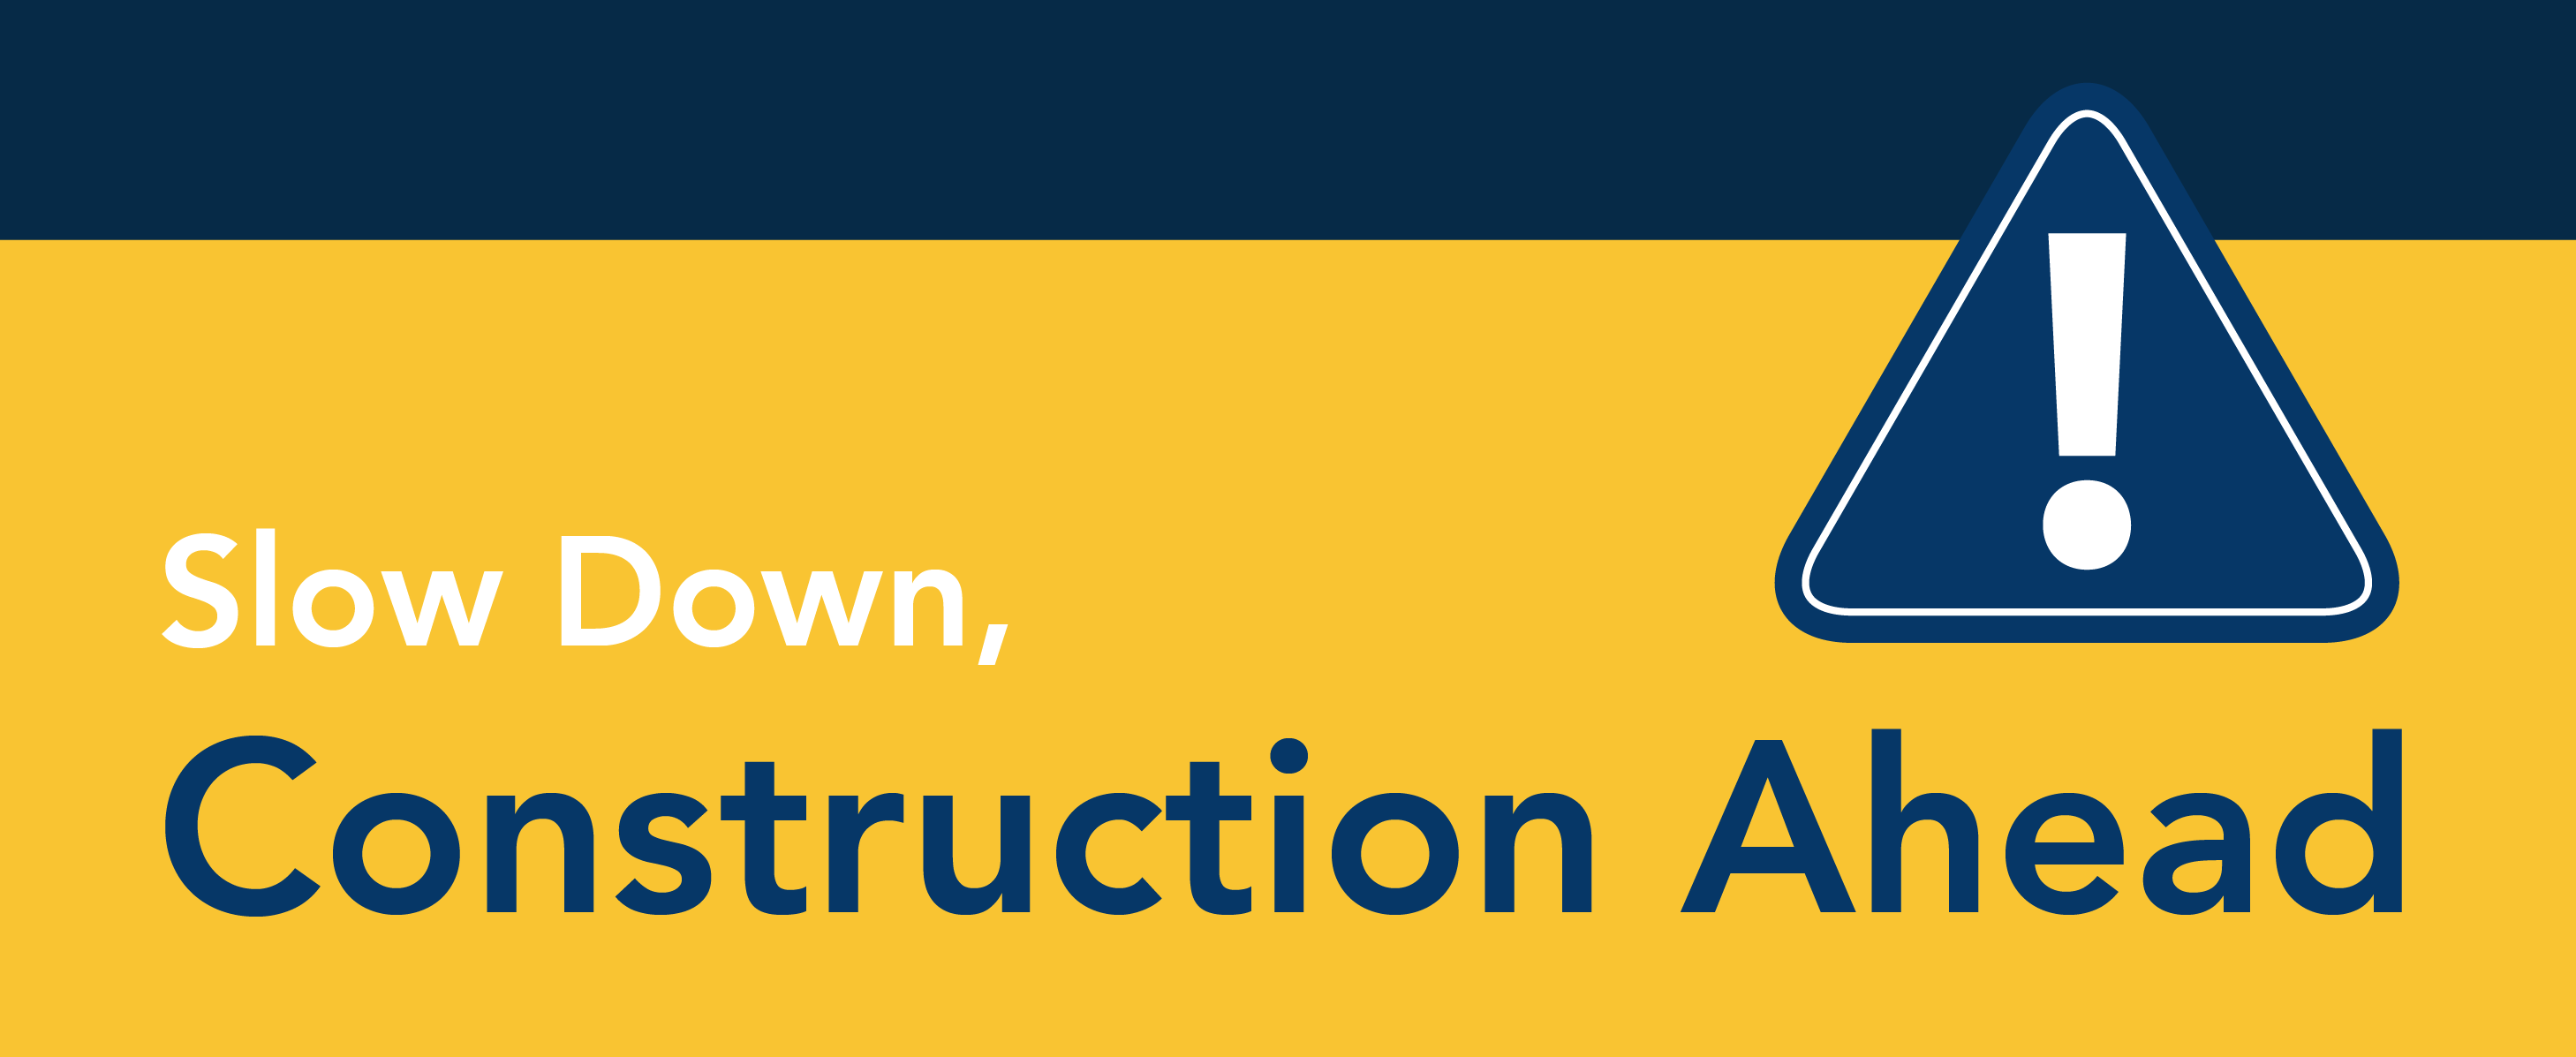 Slow down, construction ahead.